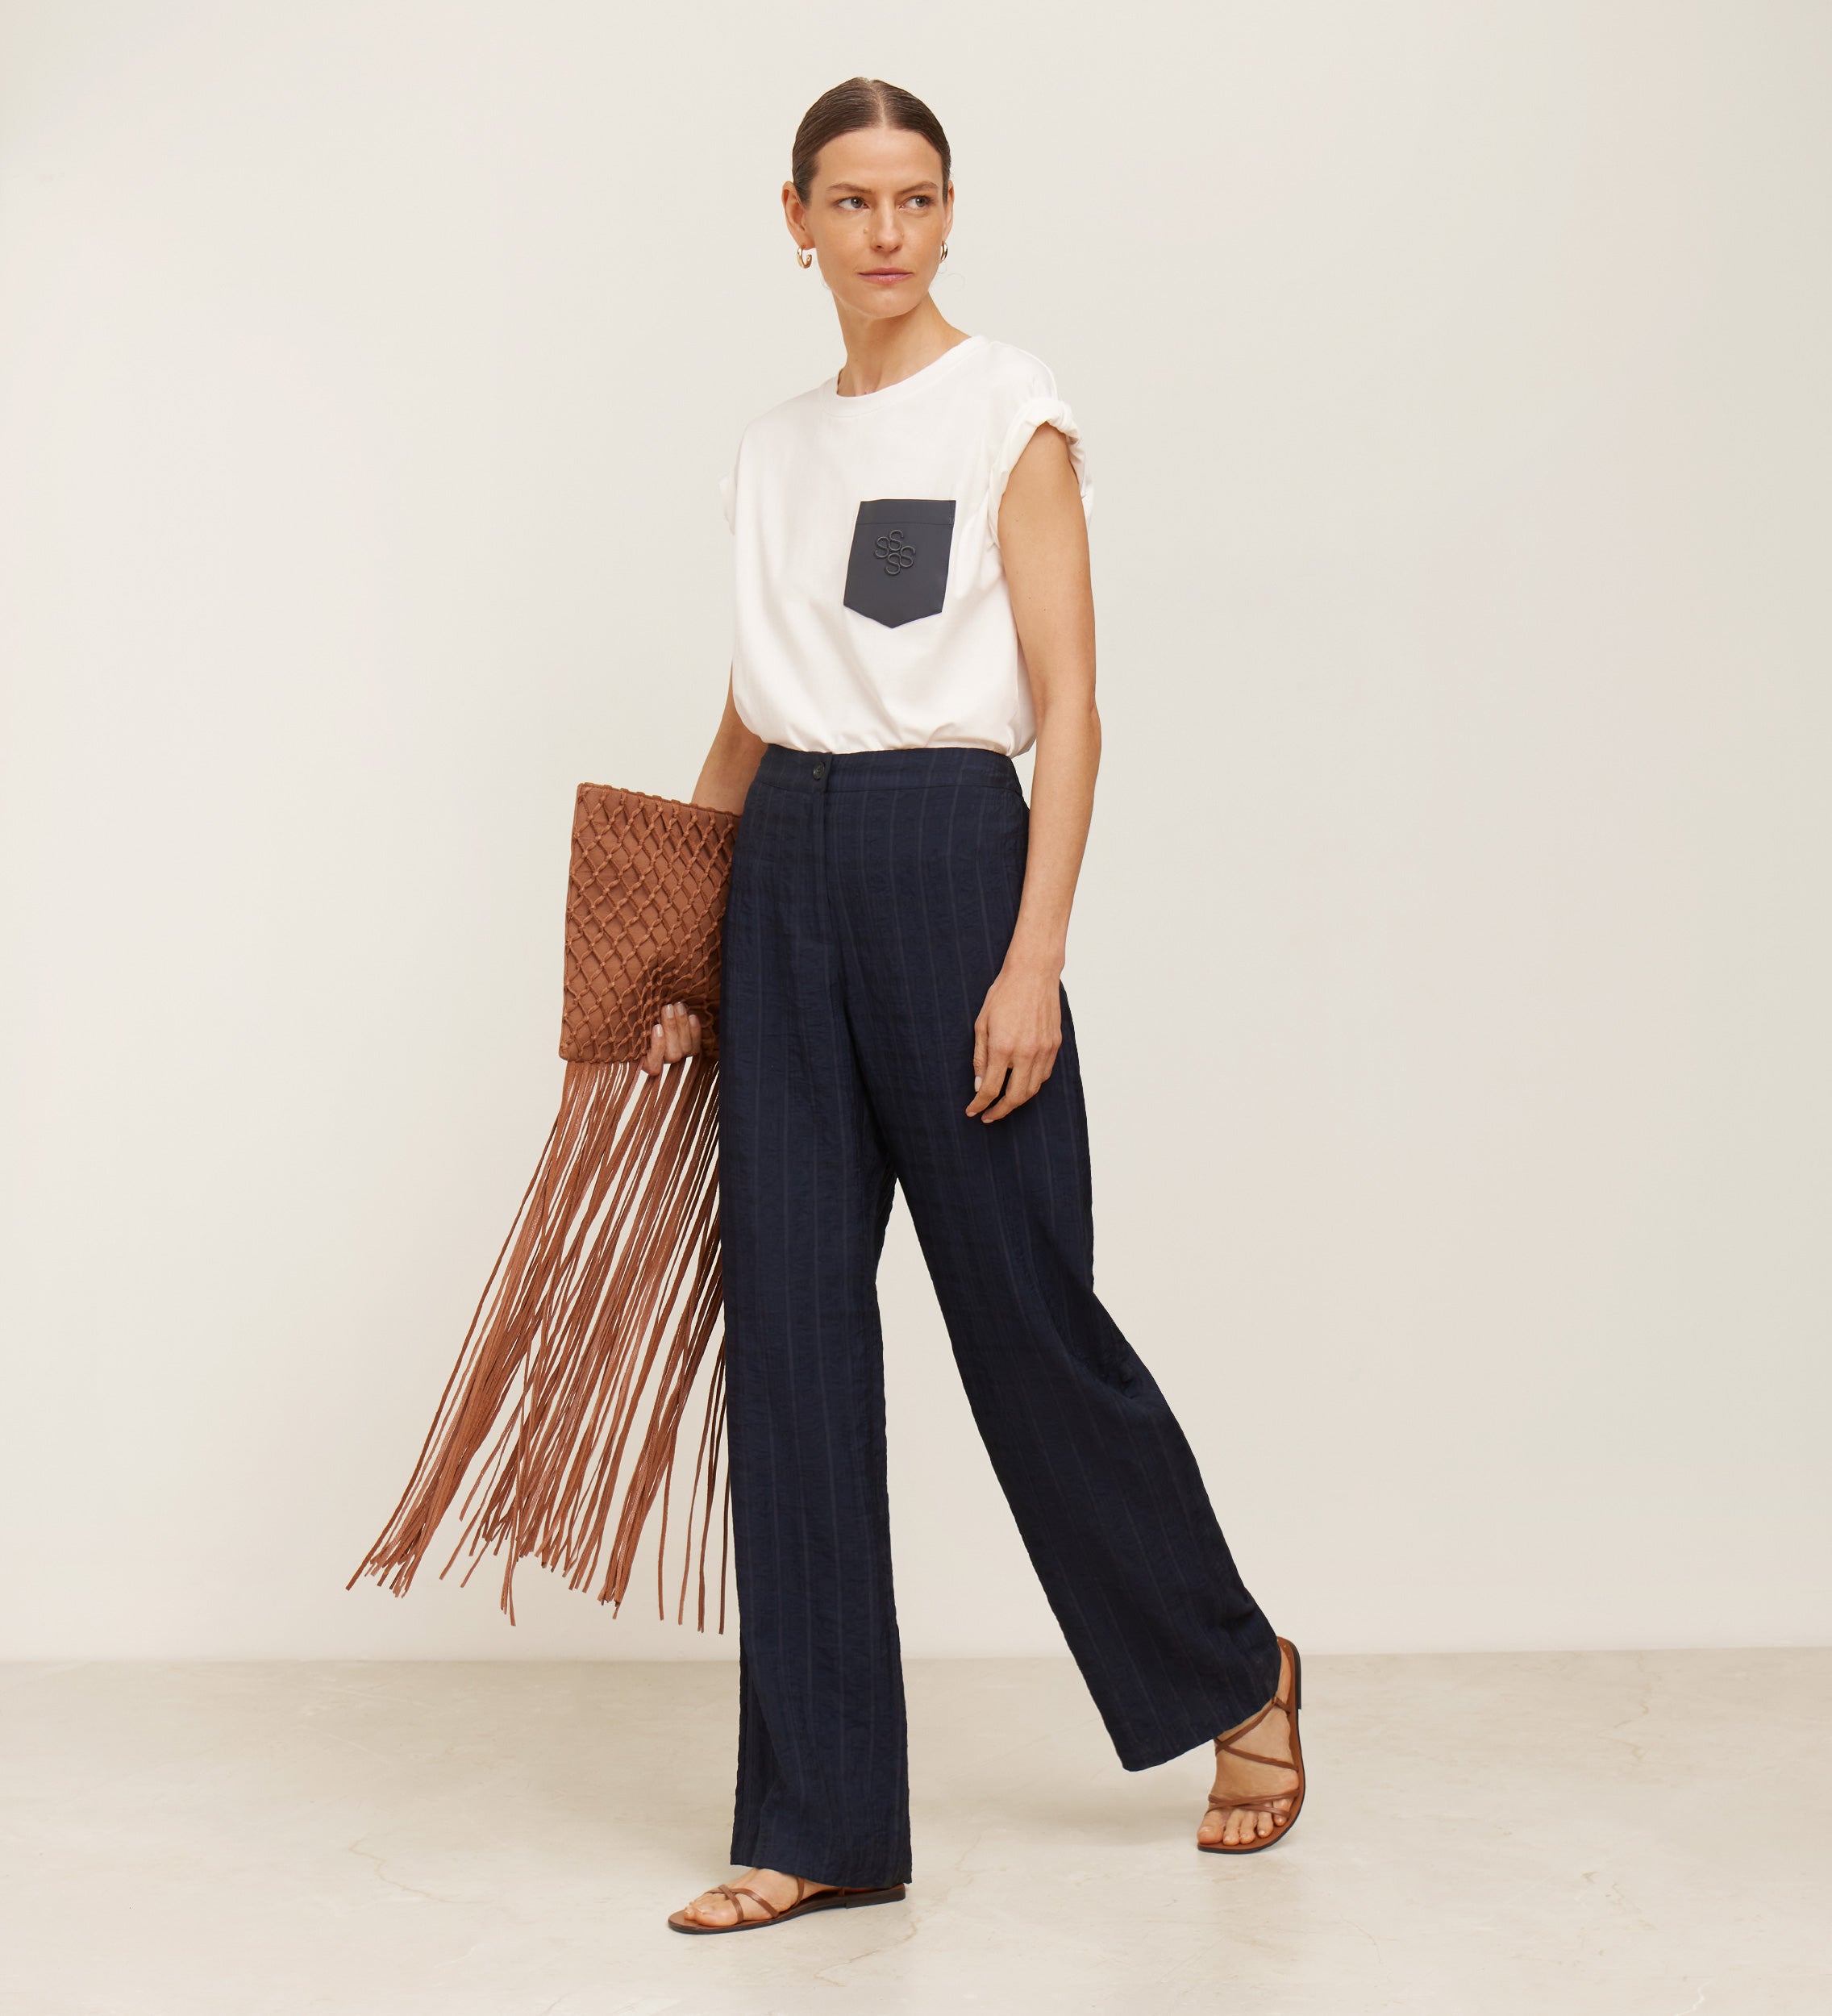 Wide textured trousers